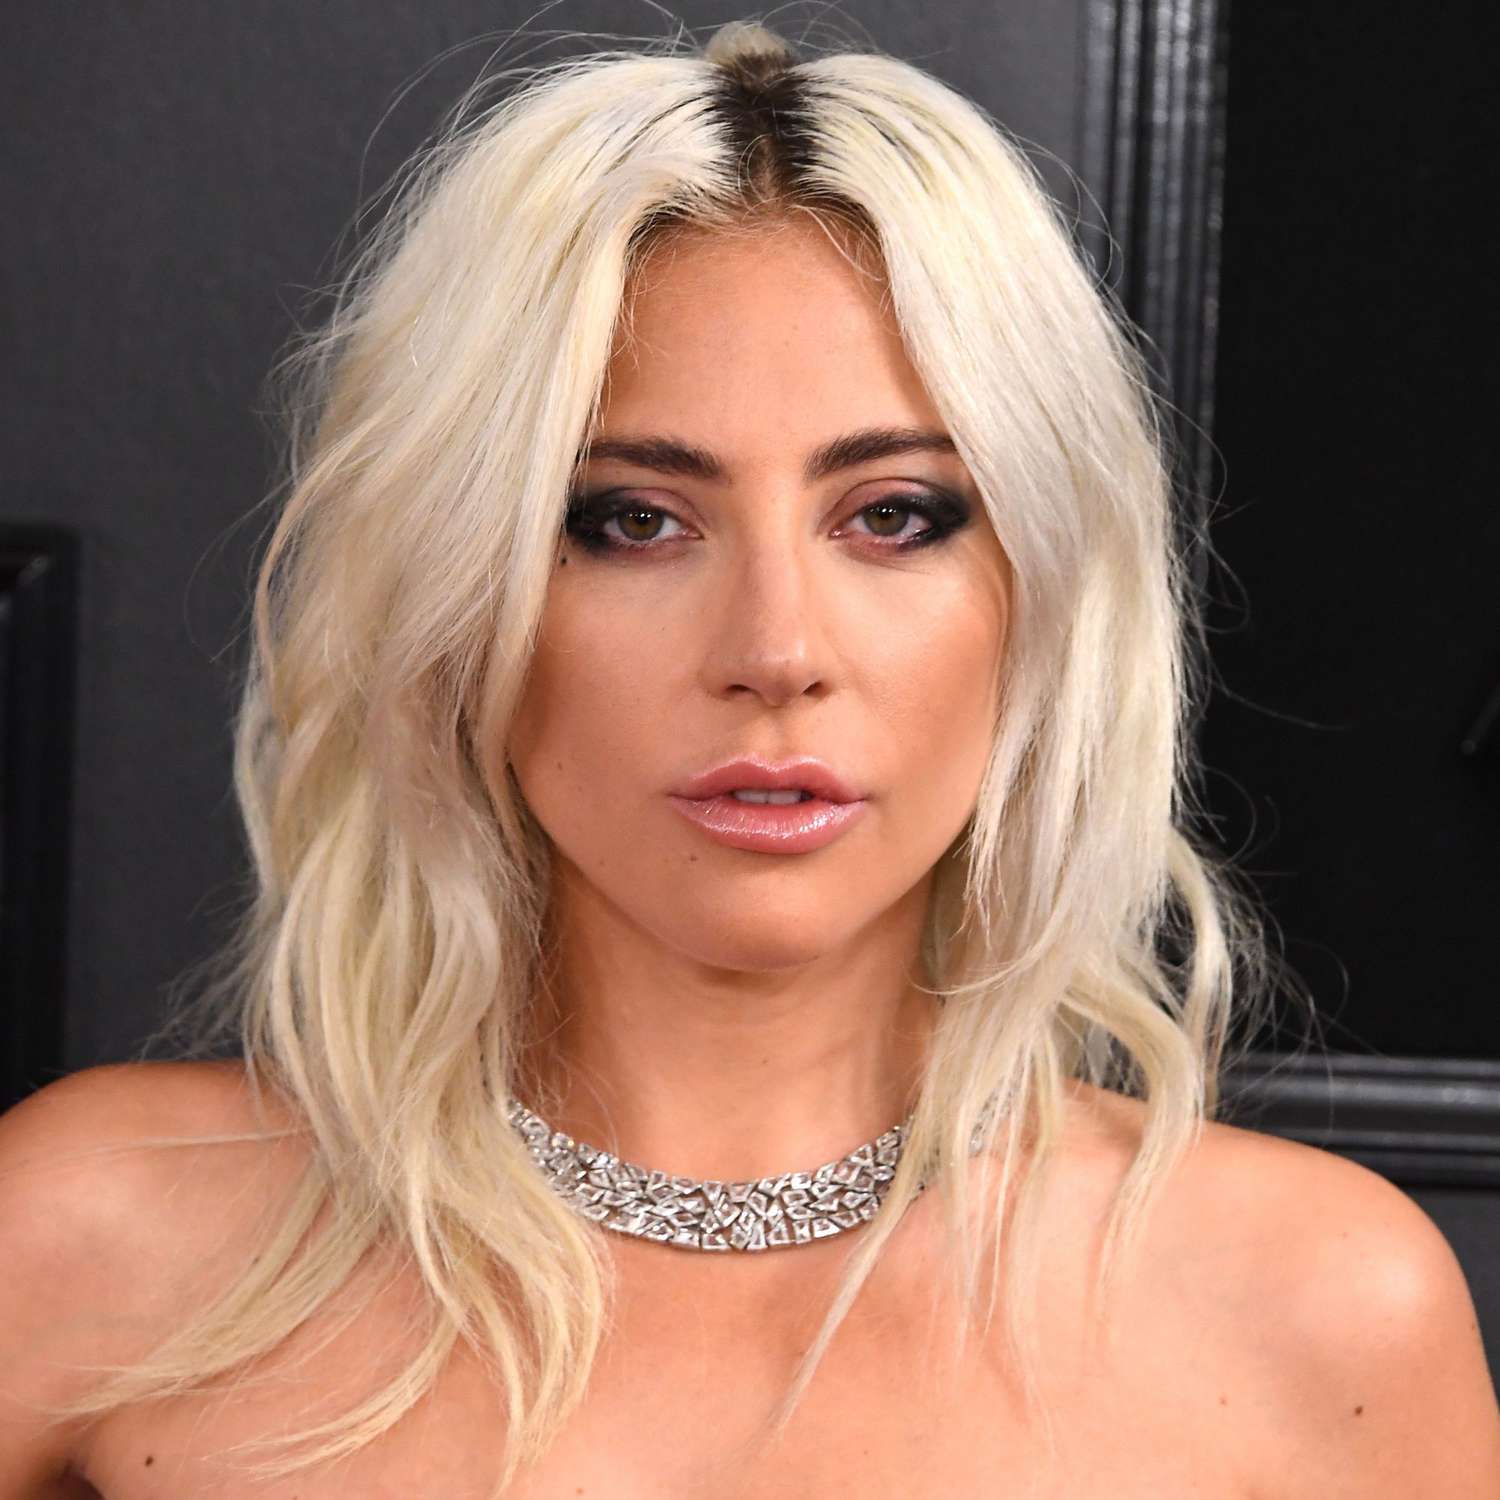 Lady Gaga Reveals Family Member Was Hospitalized for 2 in Pandemic, Praises Workers | PEOPLE.com